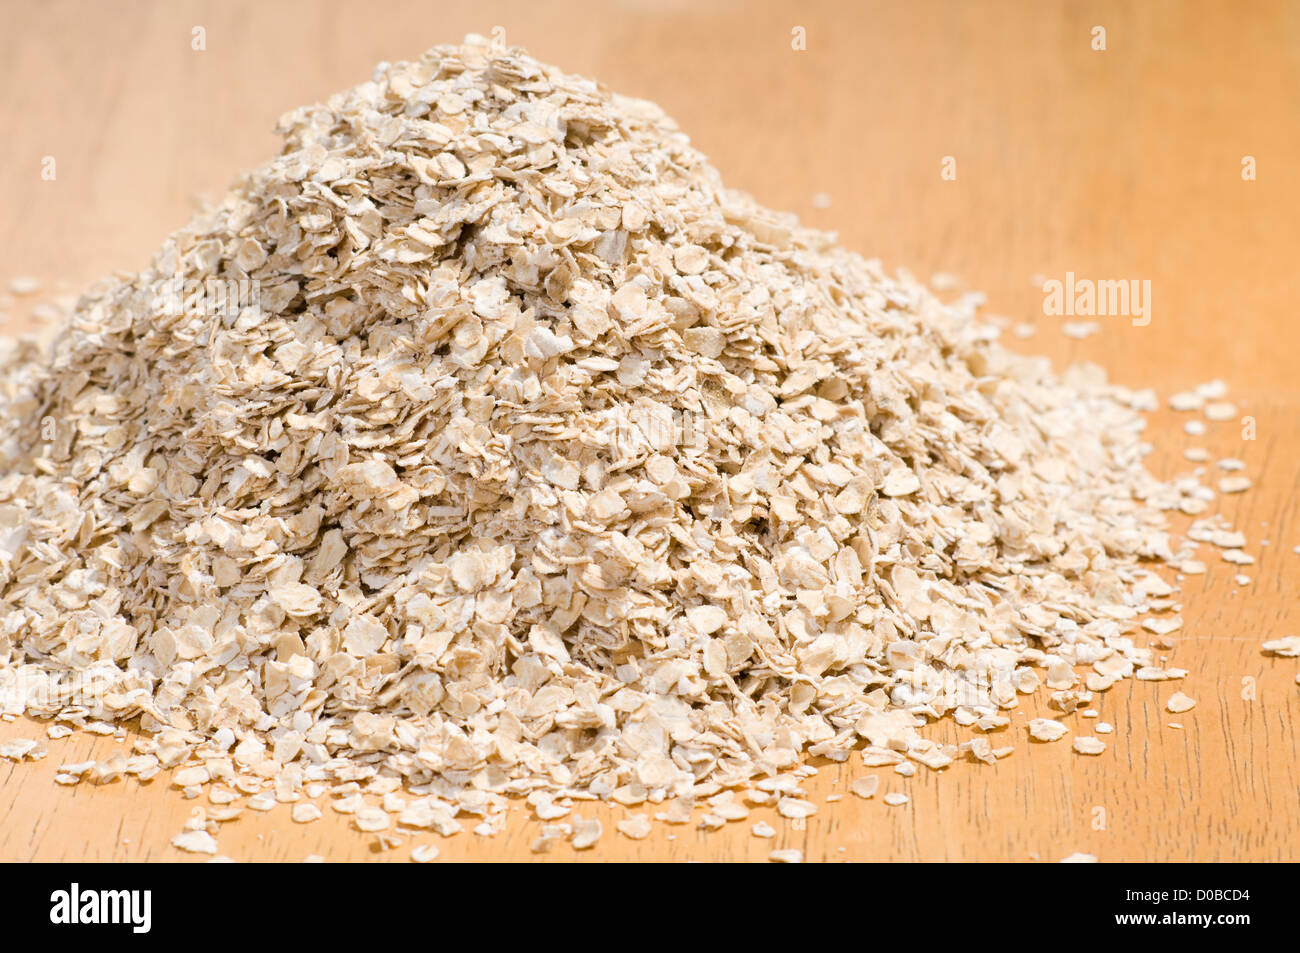 Pile of dried rolled oat flakes spilled Stock Photo